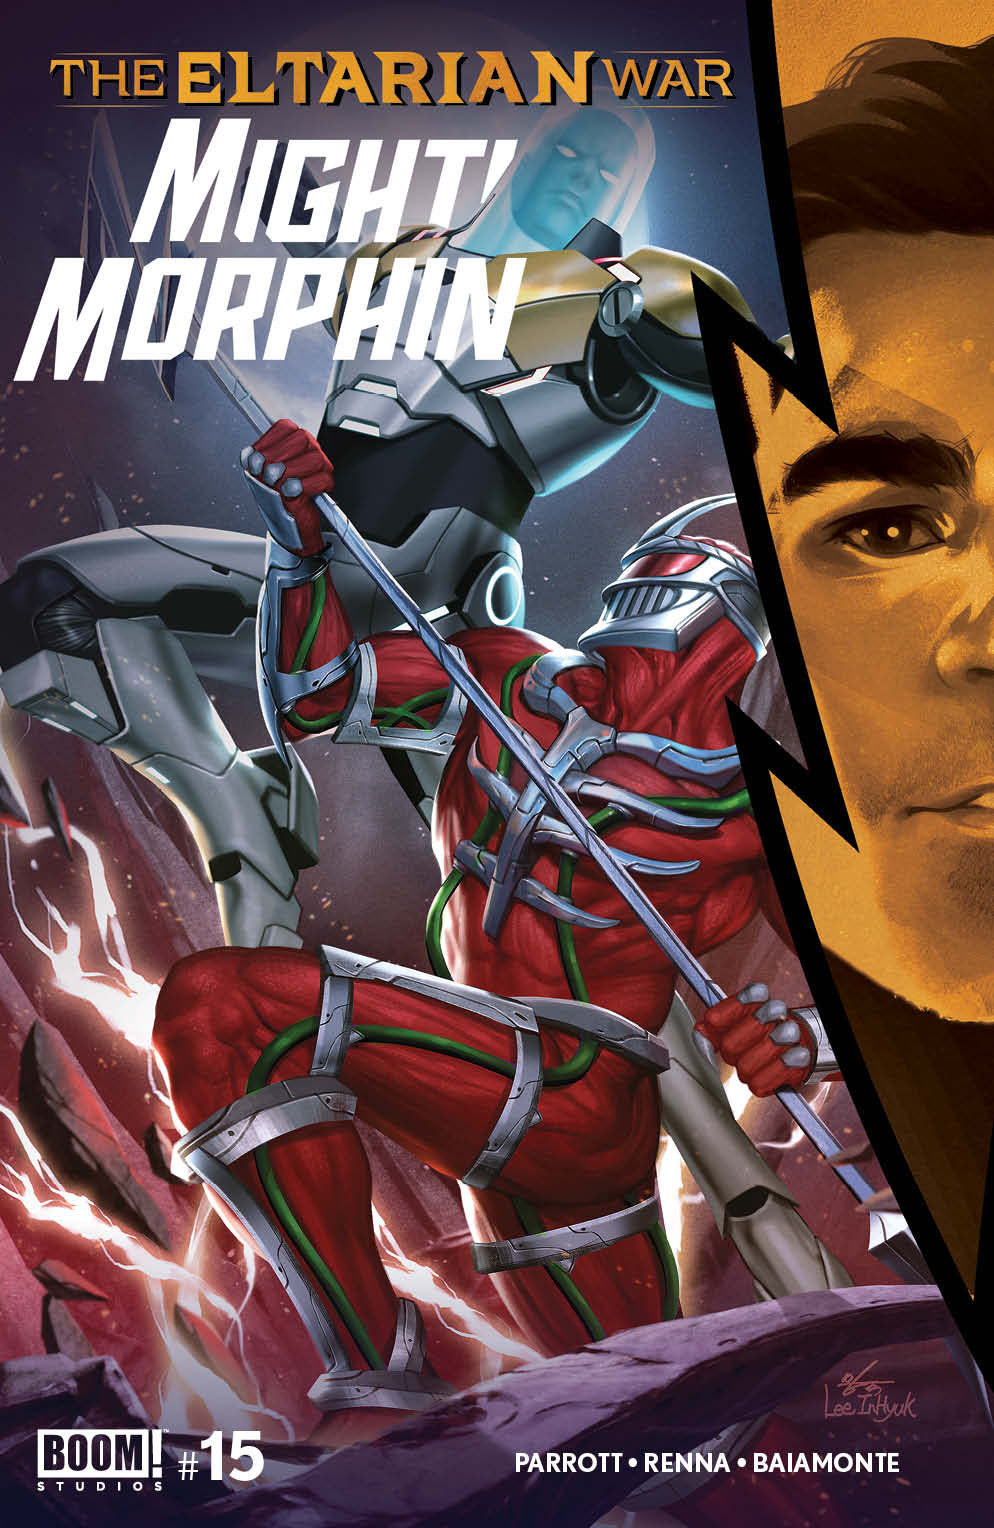 Mighty Morphin #15 Cover A Lee